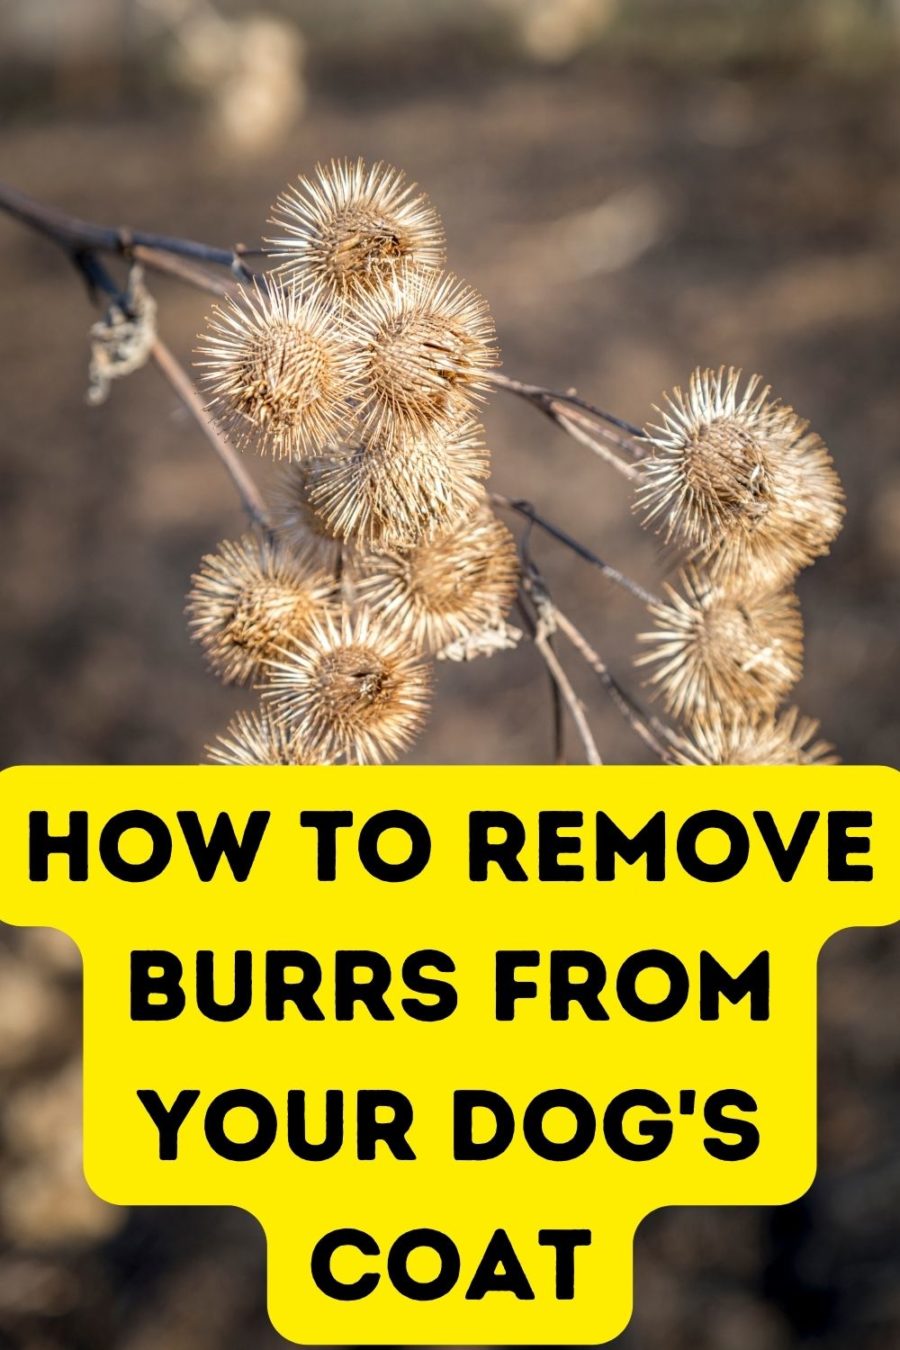 How to Remove Burrs from Your Dog's Coat